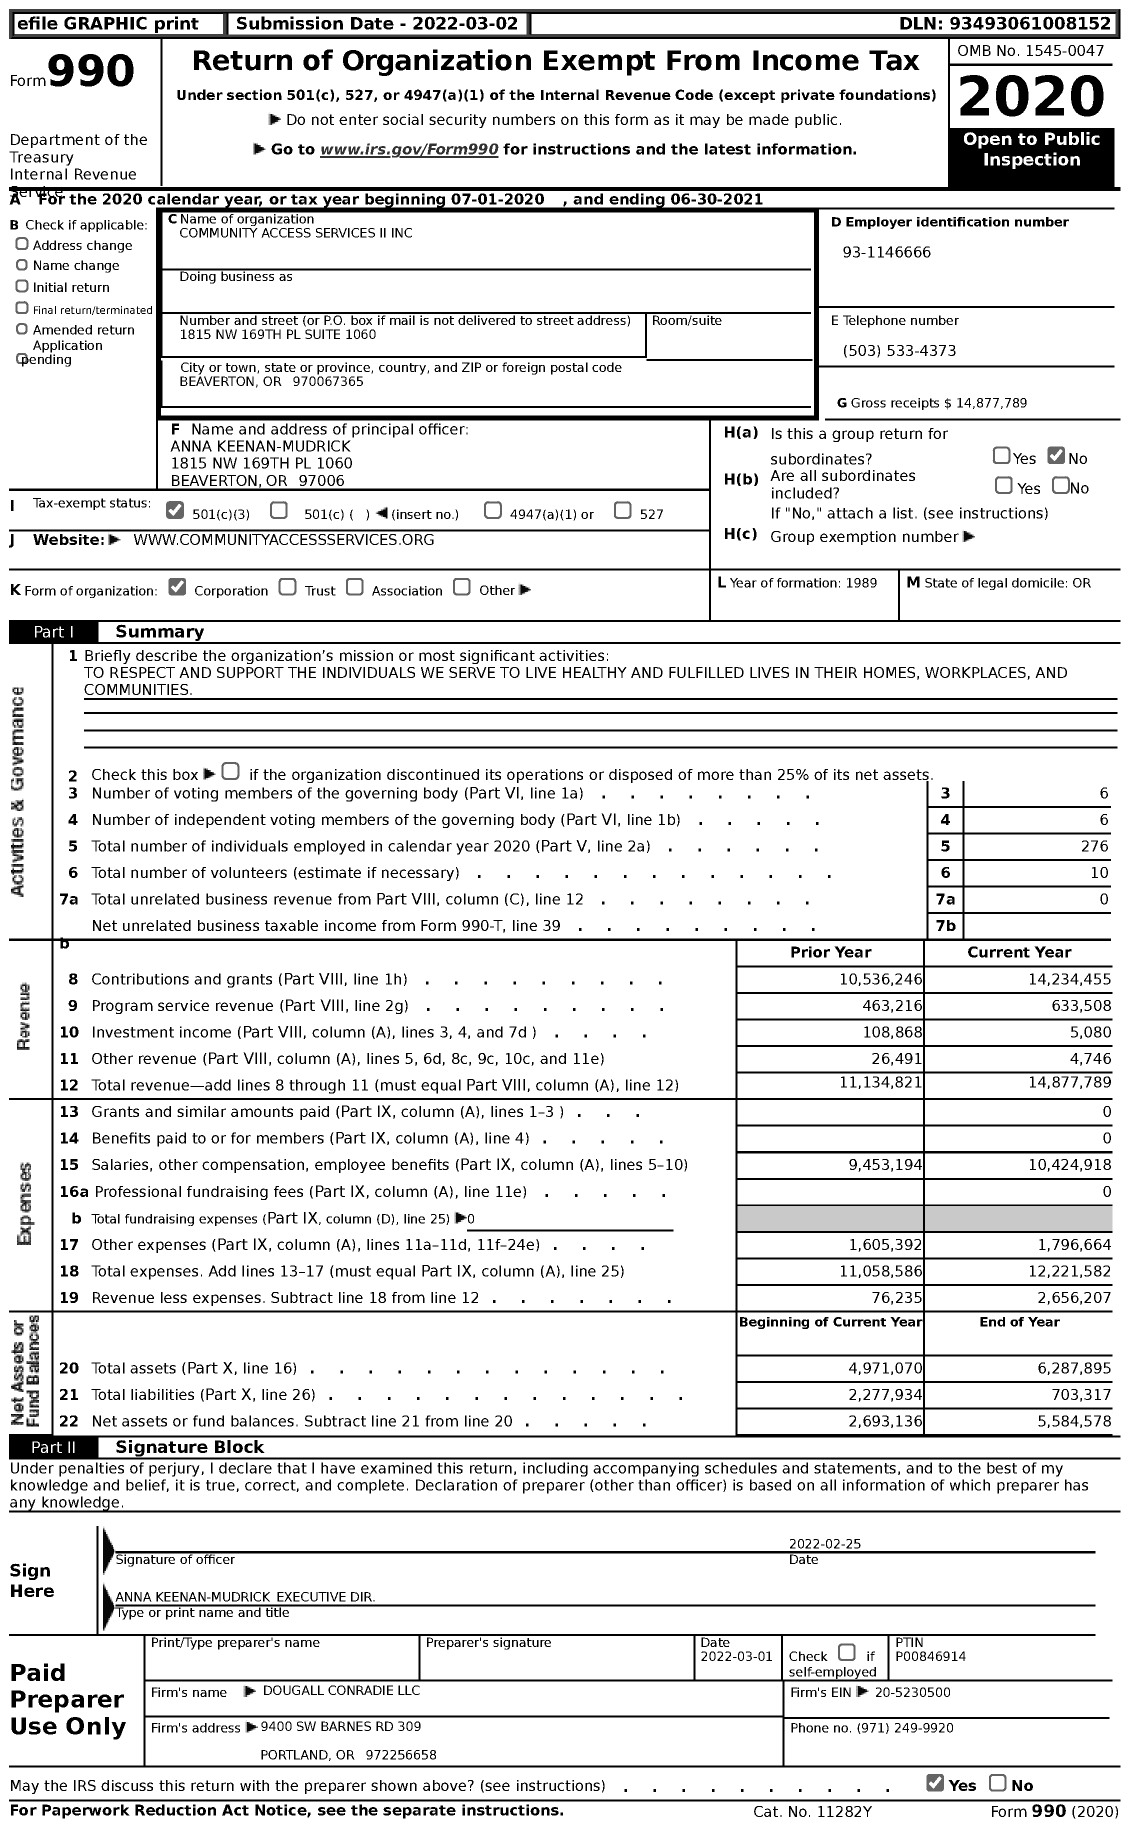 Image of first page of 2020 Form 990 for Community Access Services II